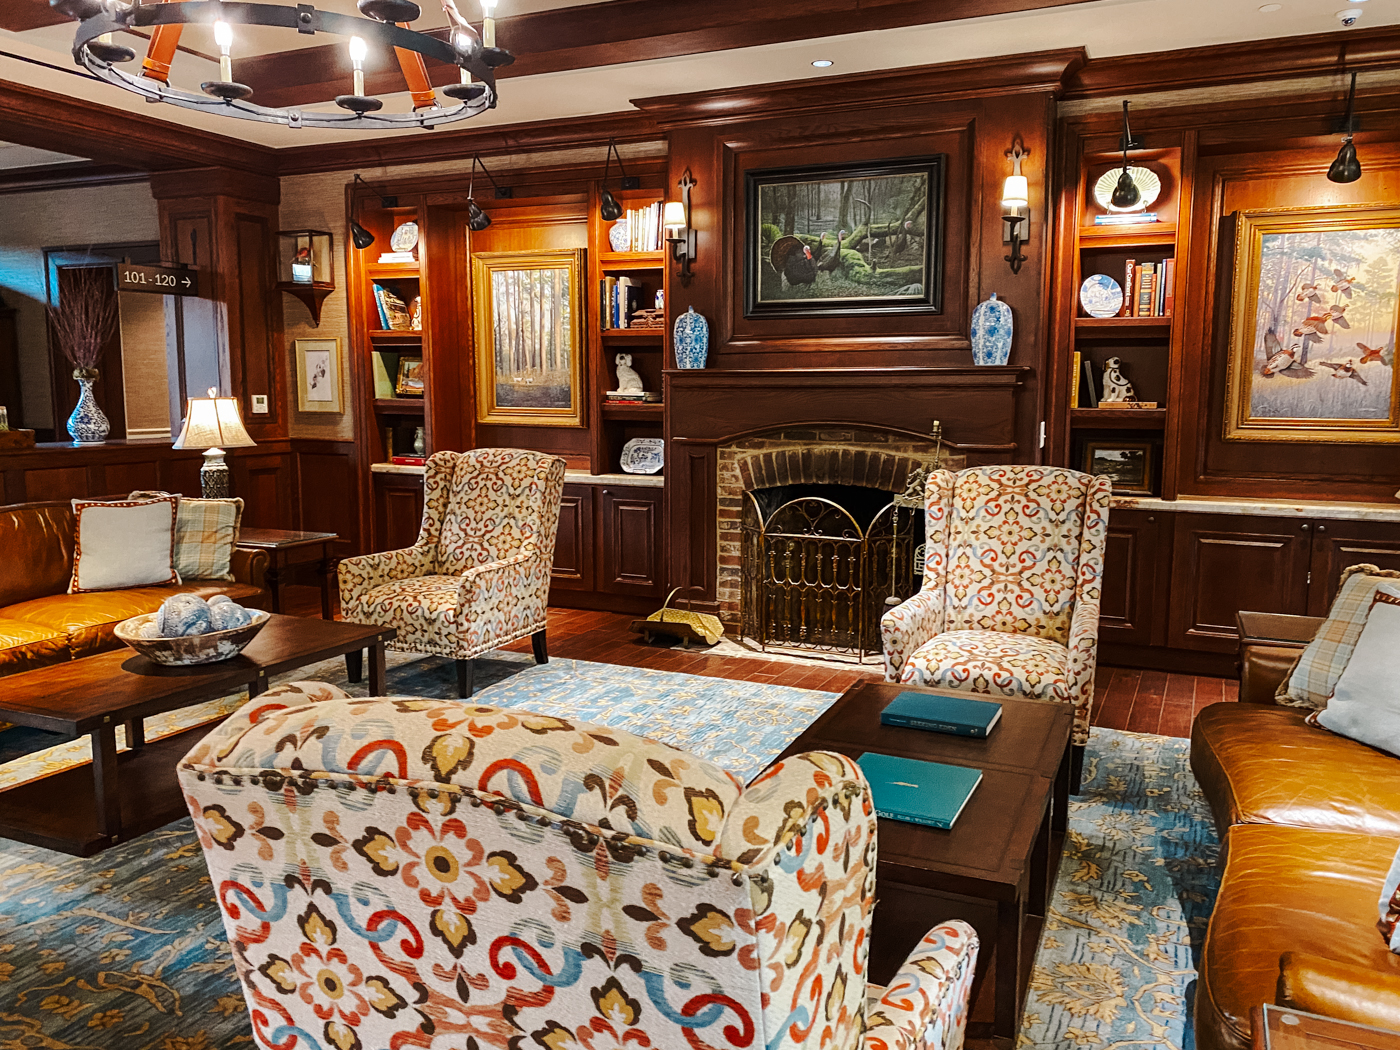 Barnsley Resort by popular Memphis travel blog, Lone Star Looking Glass: image of a sitting room with a red brick fireplace, dark wood trim, dark wood built in shelves, leather couches, blue and cream area rug, oil paintings of ducks in gold frames, and floral print arm chairs. 